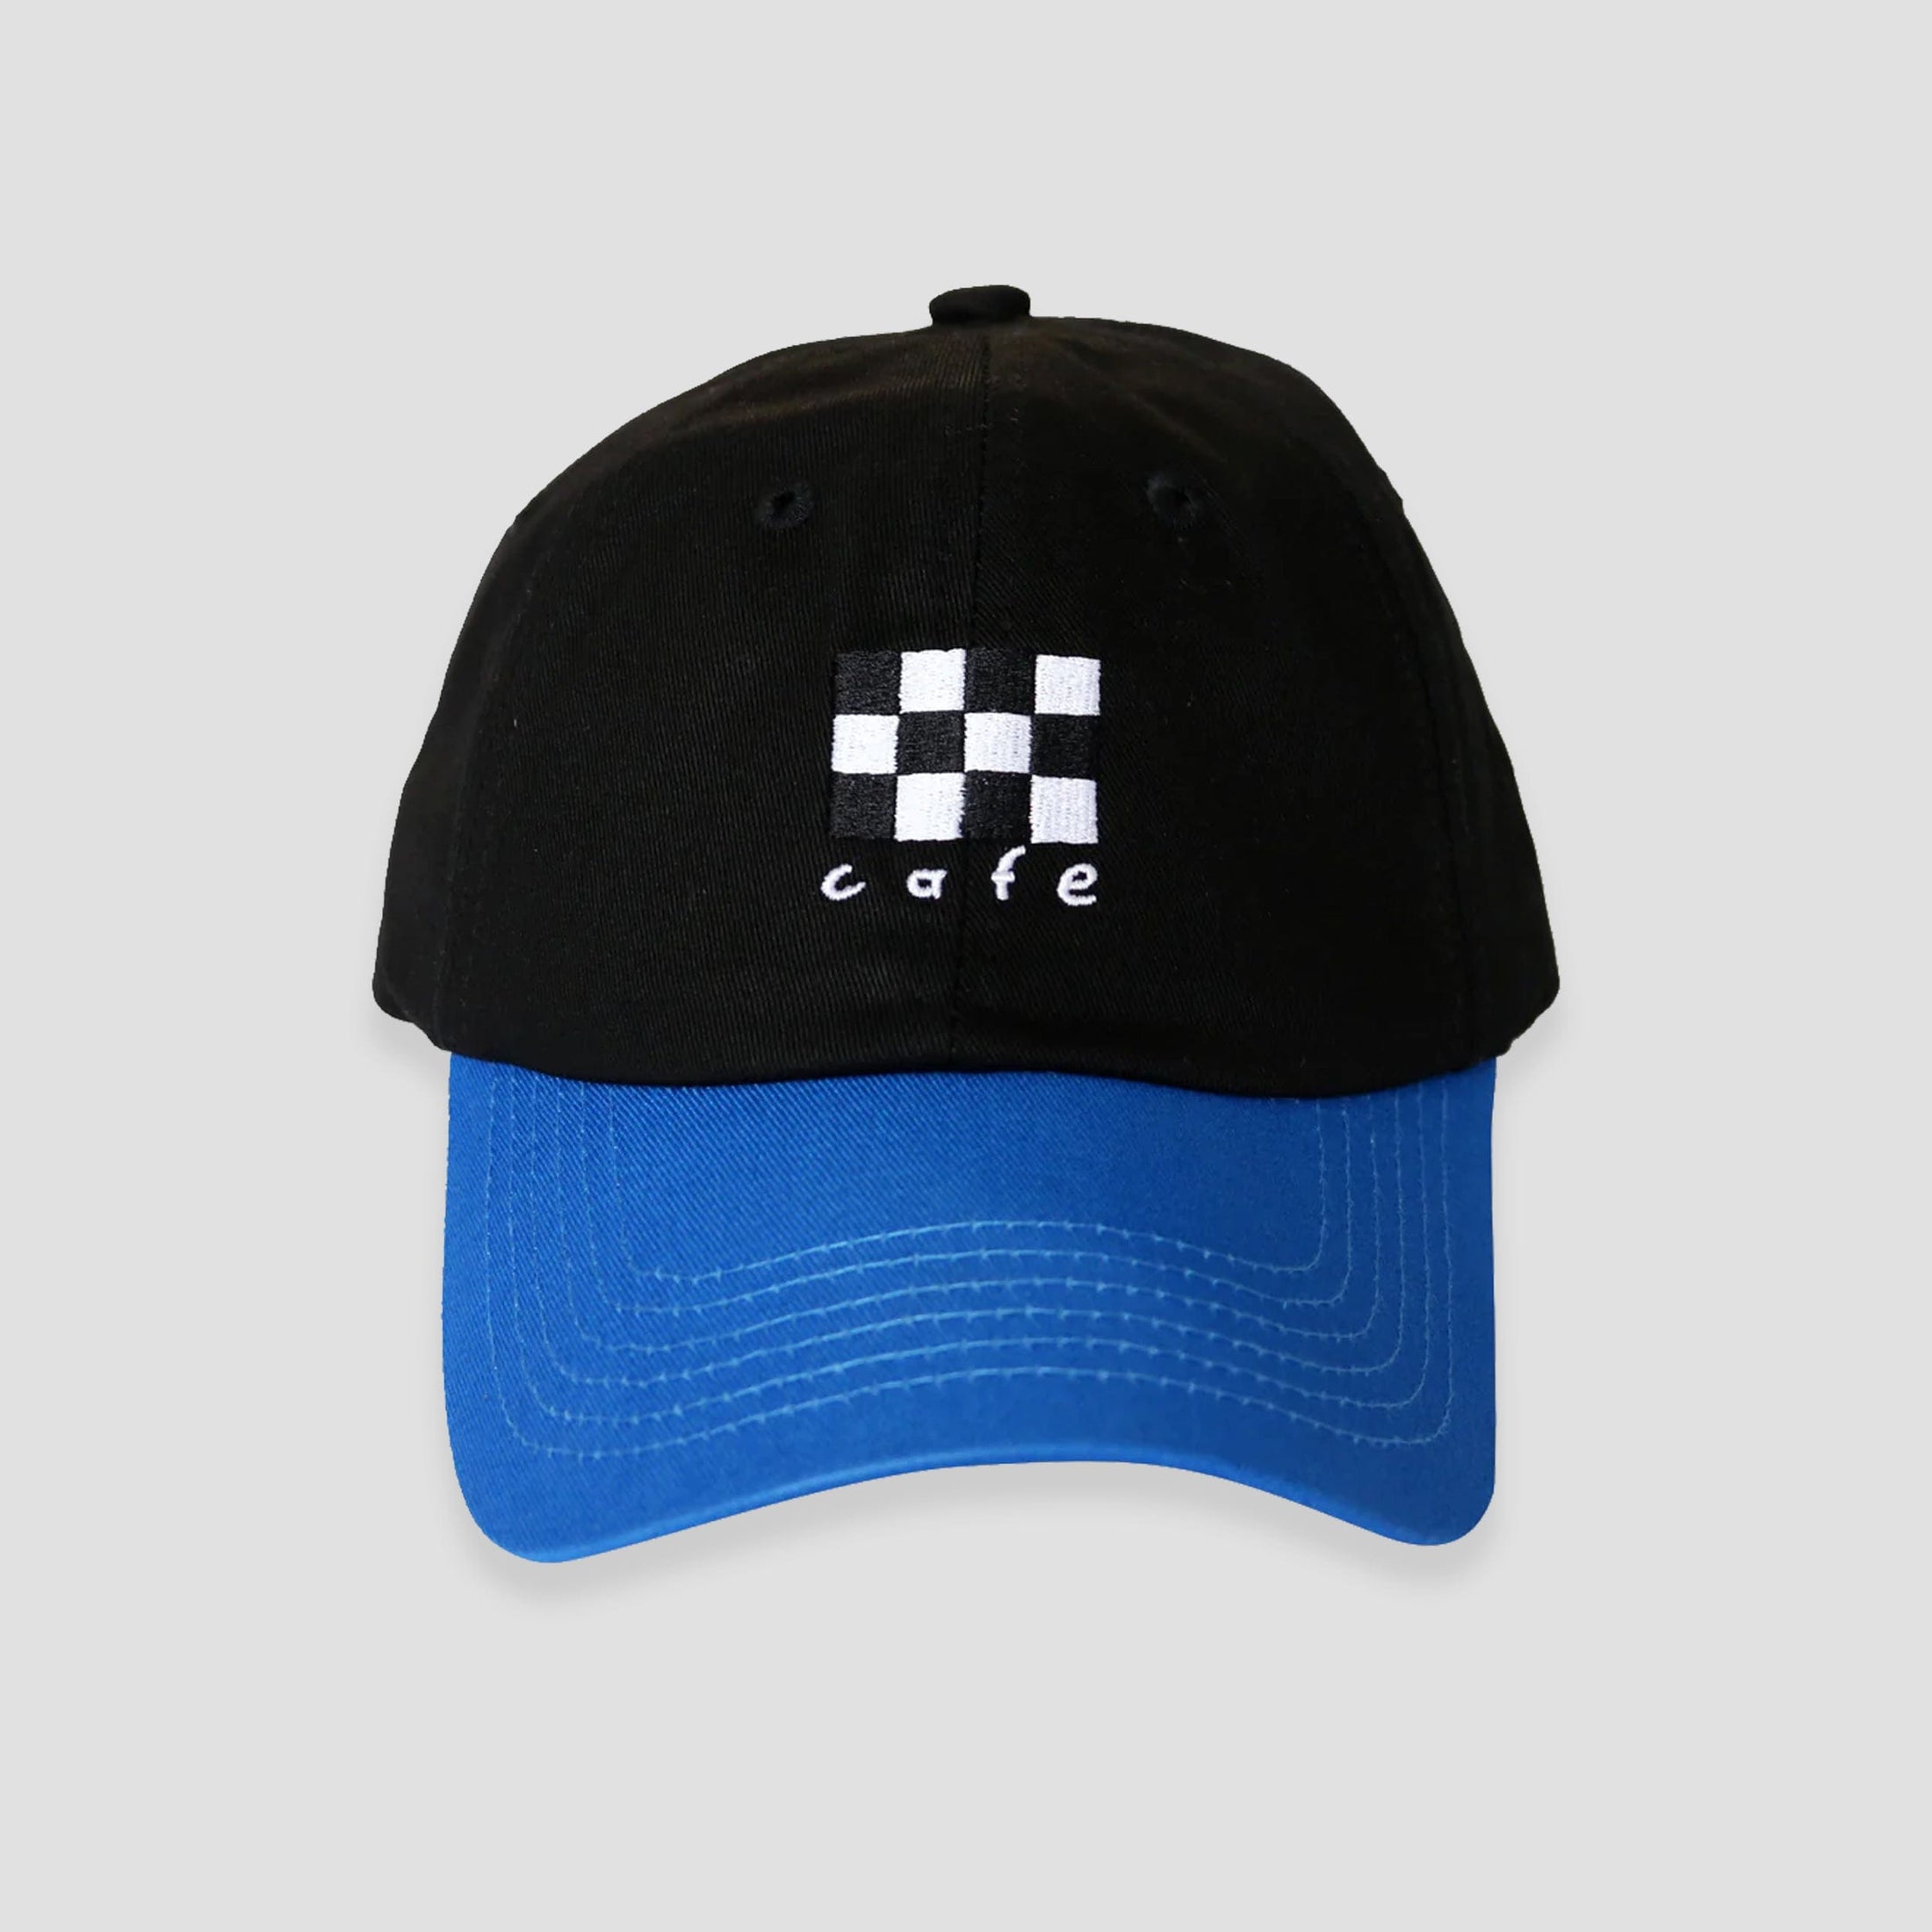 Skateboard Cafe Checkerboard Embroidered 6 Panel Cap Black / Blue